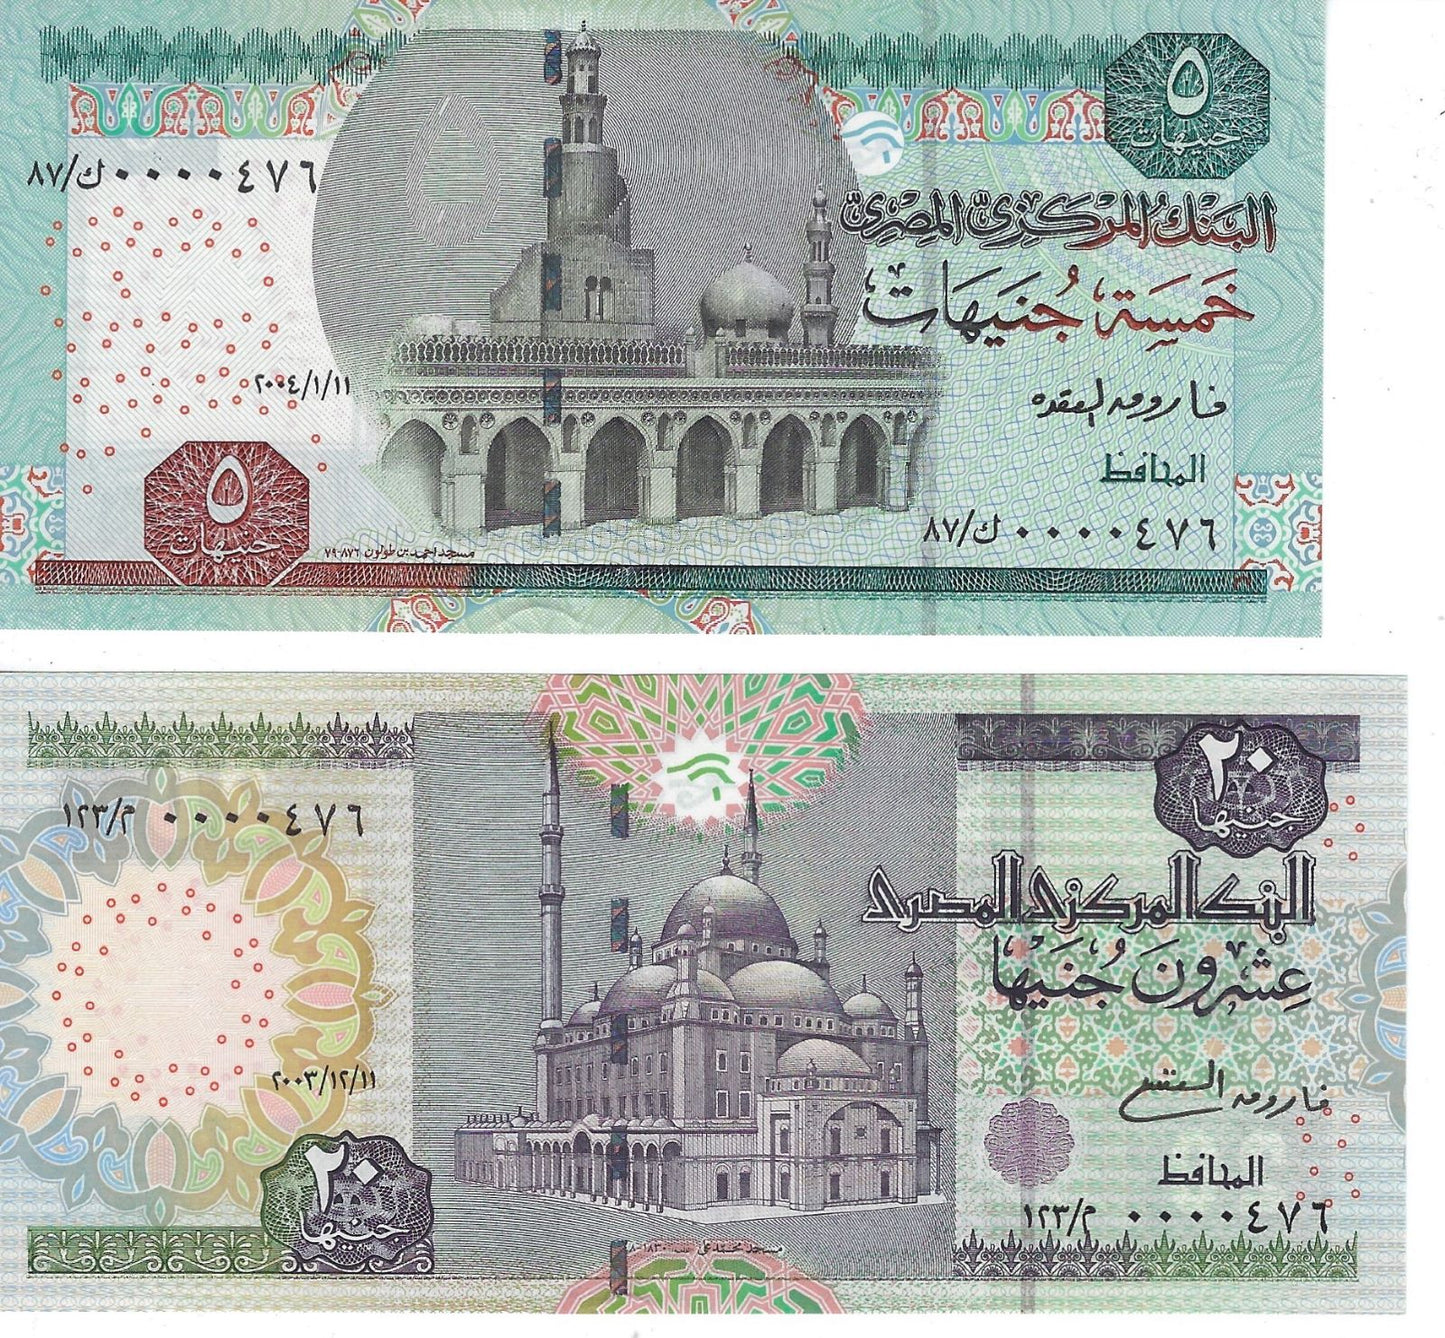 Egypt 5 & 20 pounds 1.11.2004&11.12.2003 Both have same SN 0000476 UNC worth$65.EG1Y